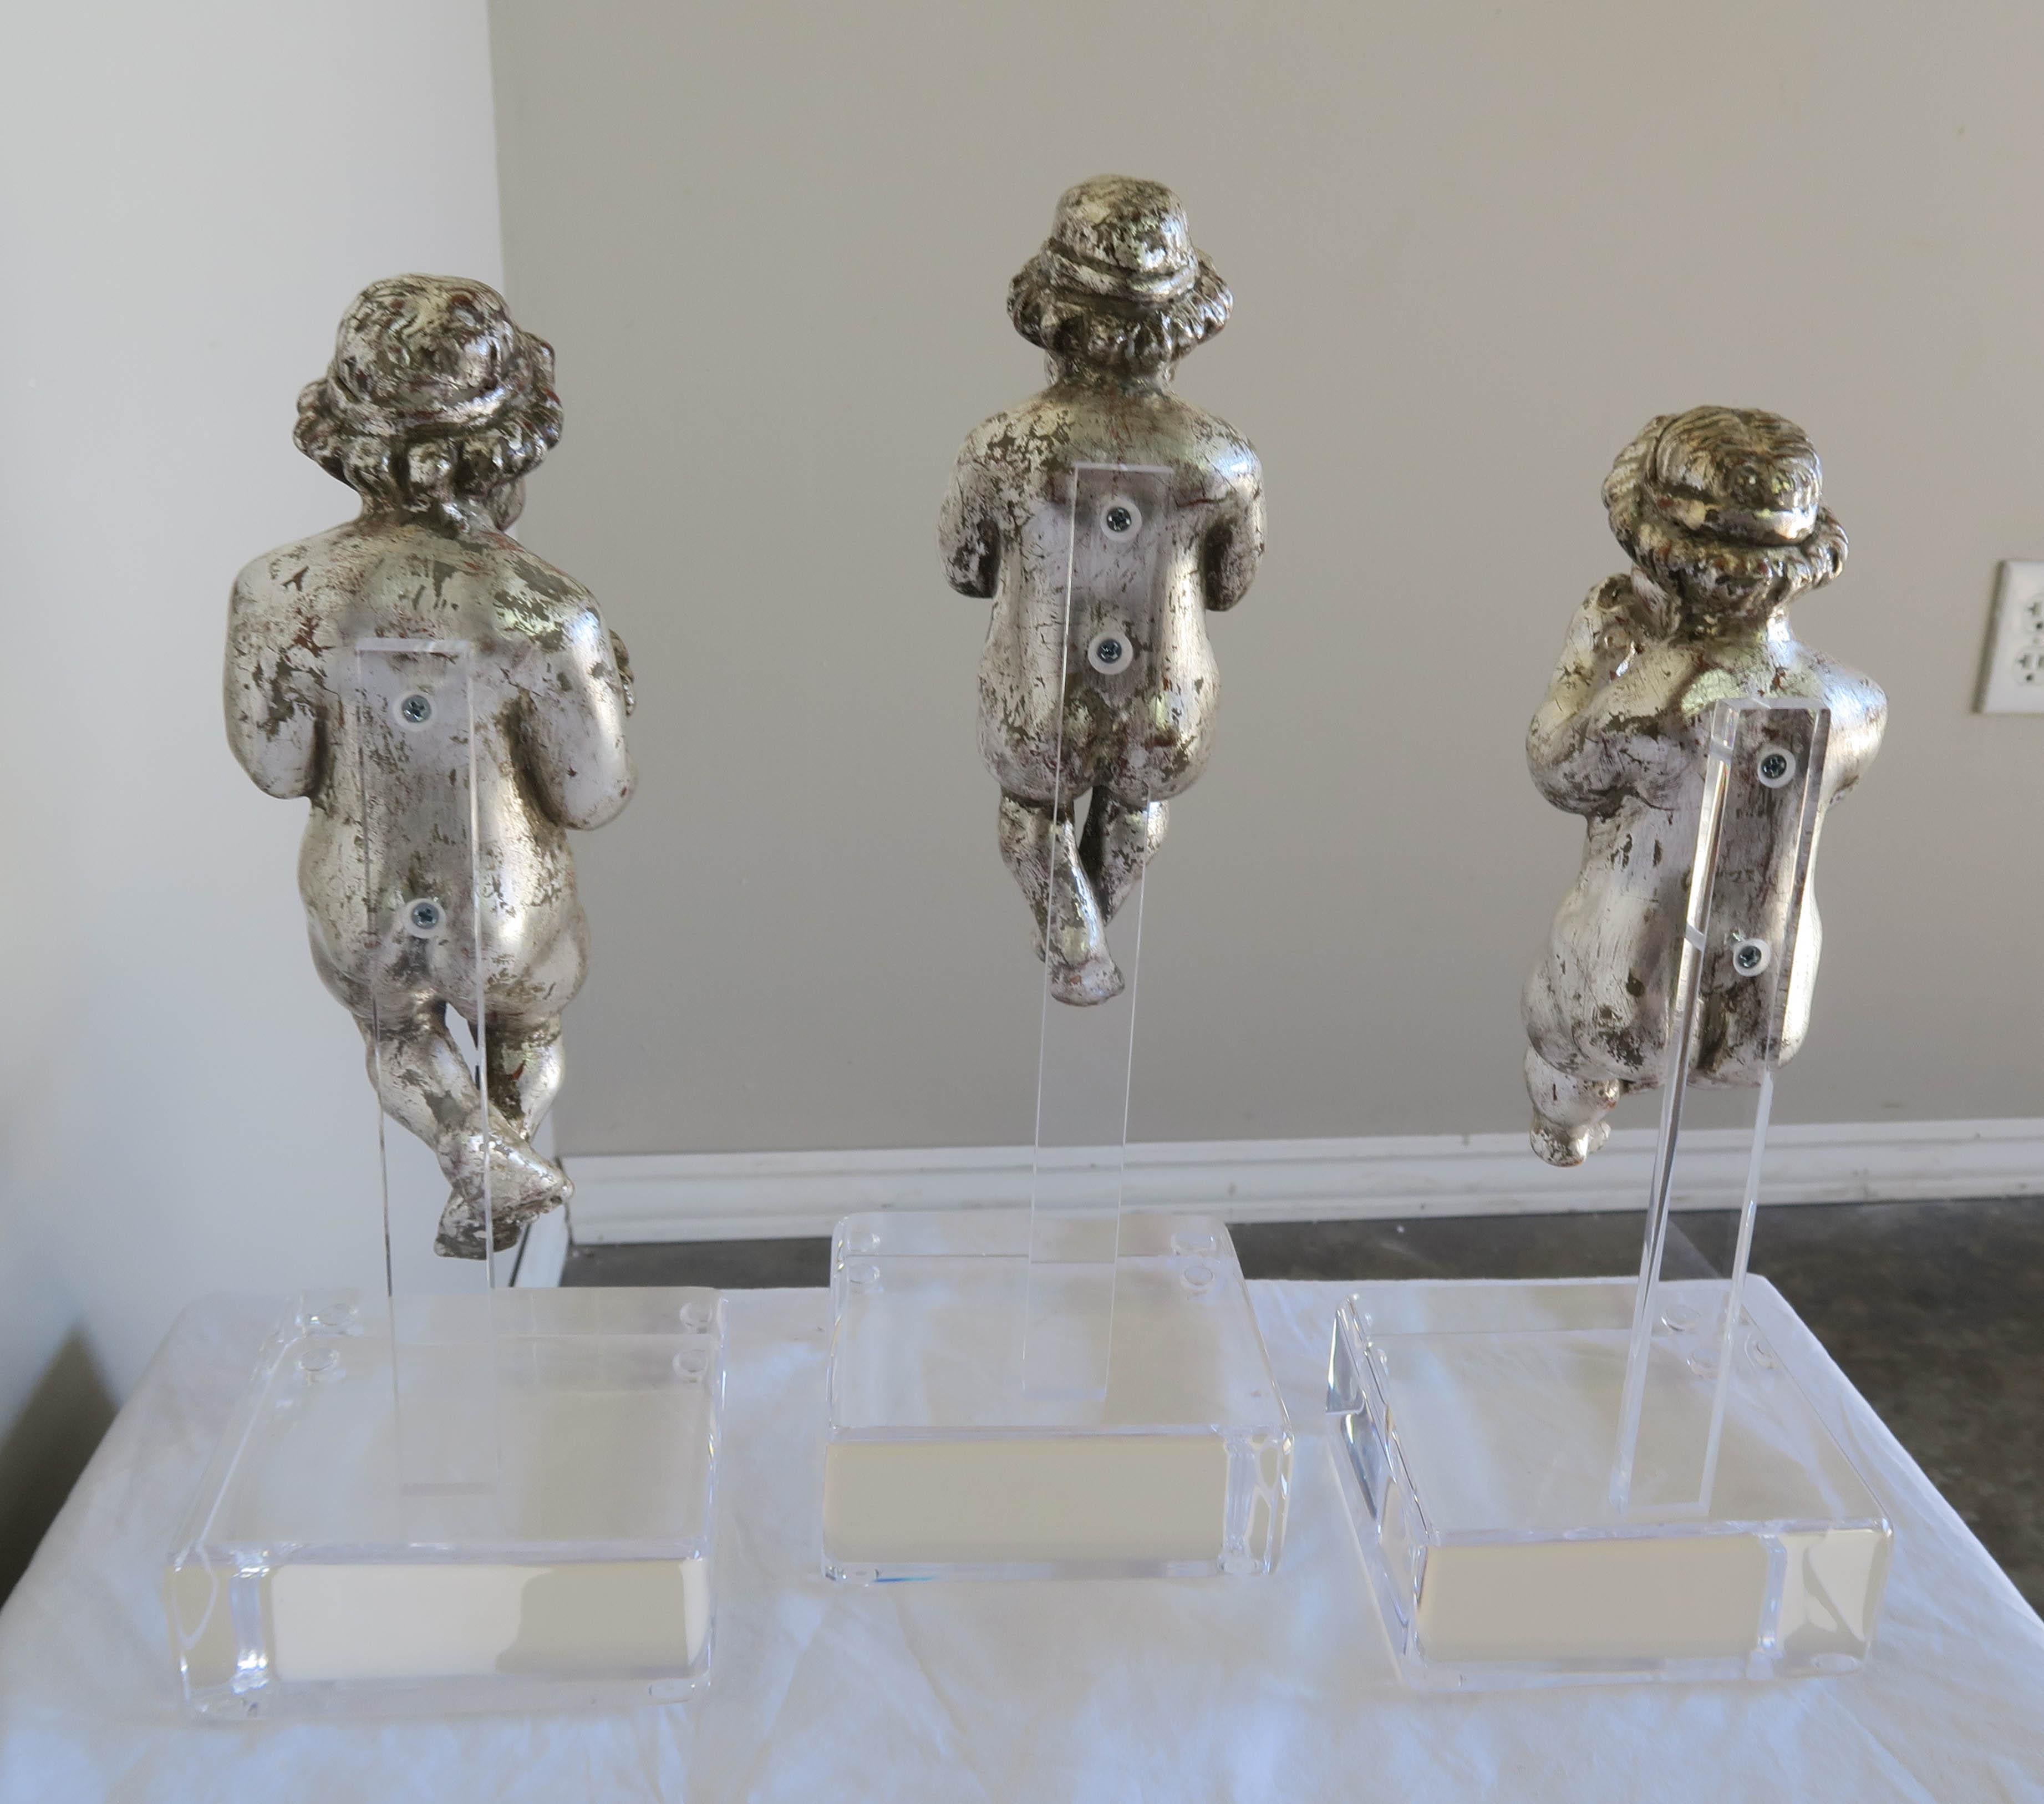 Set of three silver gilt musical Cherubs mounted on Lucite bases.
Measures: Cherub with horn 12